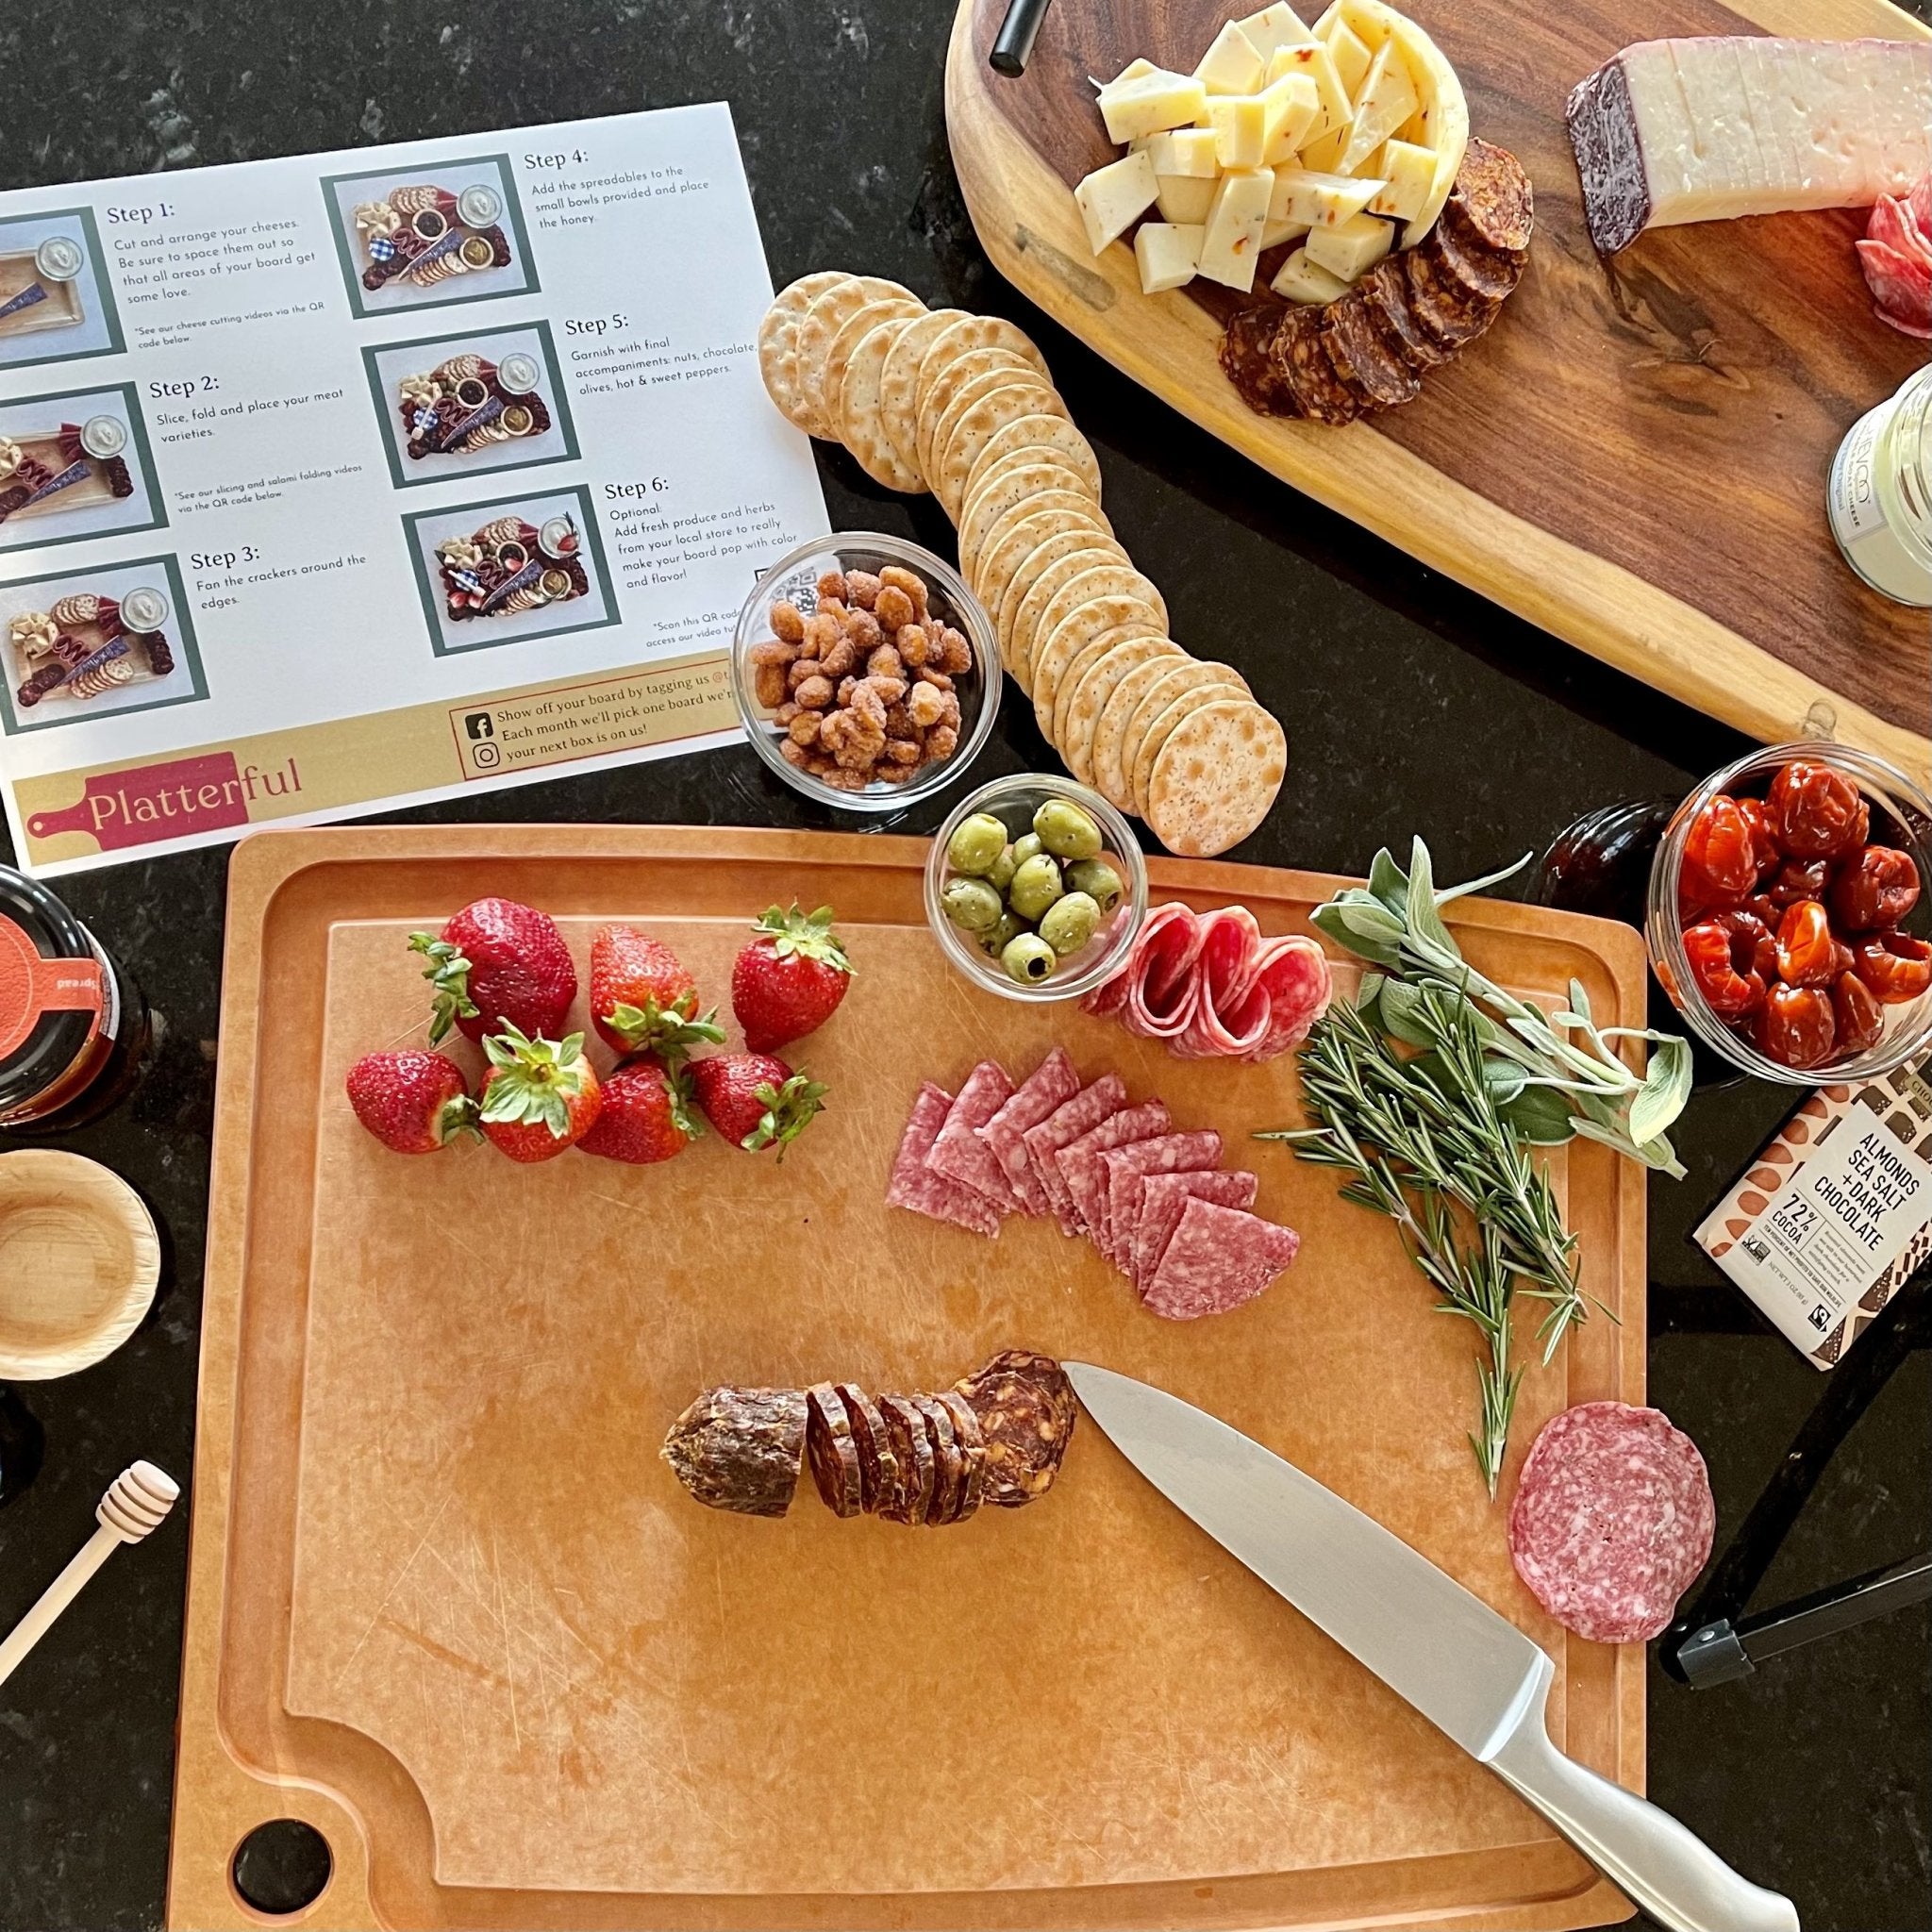 A step-by-step tutorial on how to build your own delicious charcuterie board.